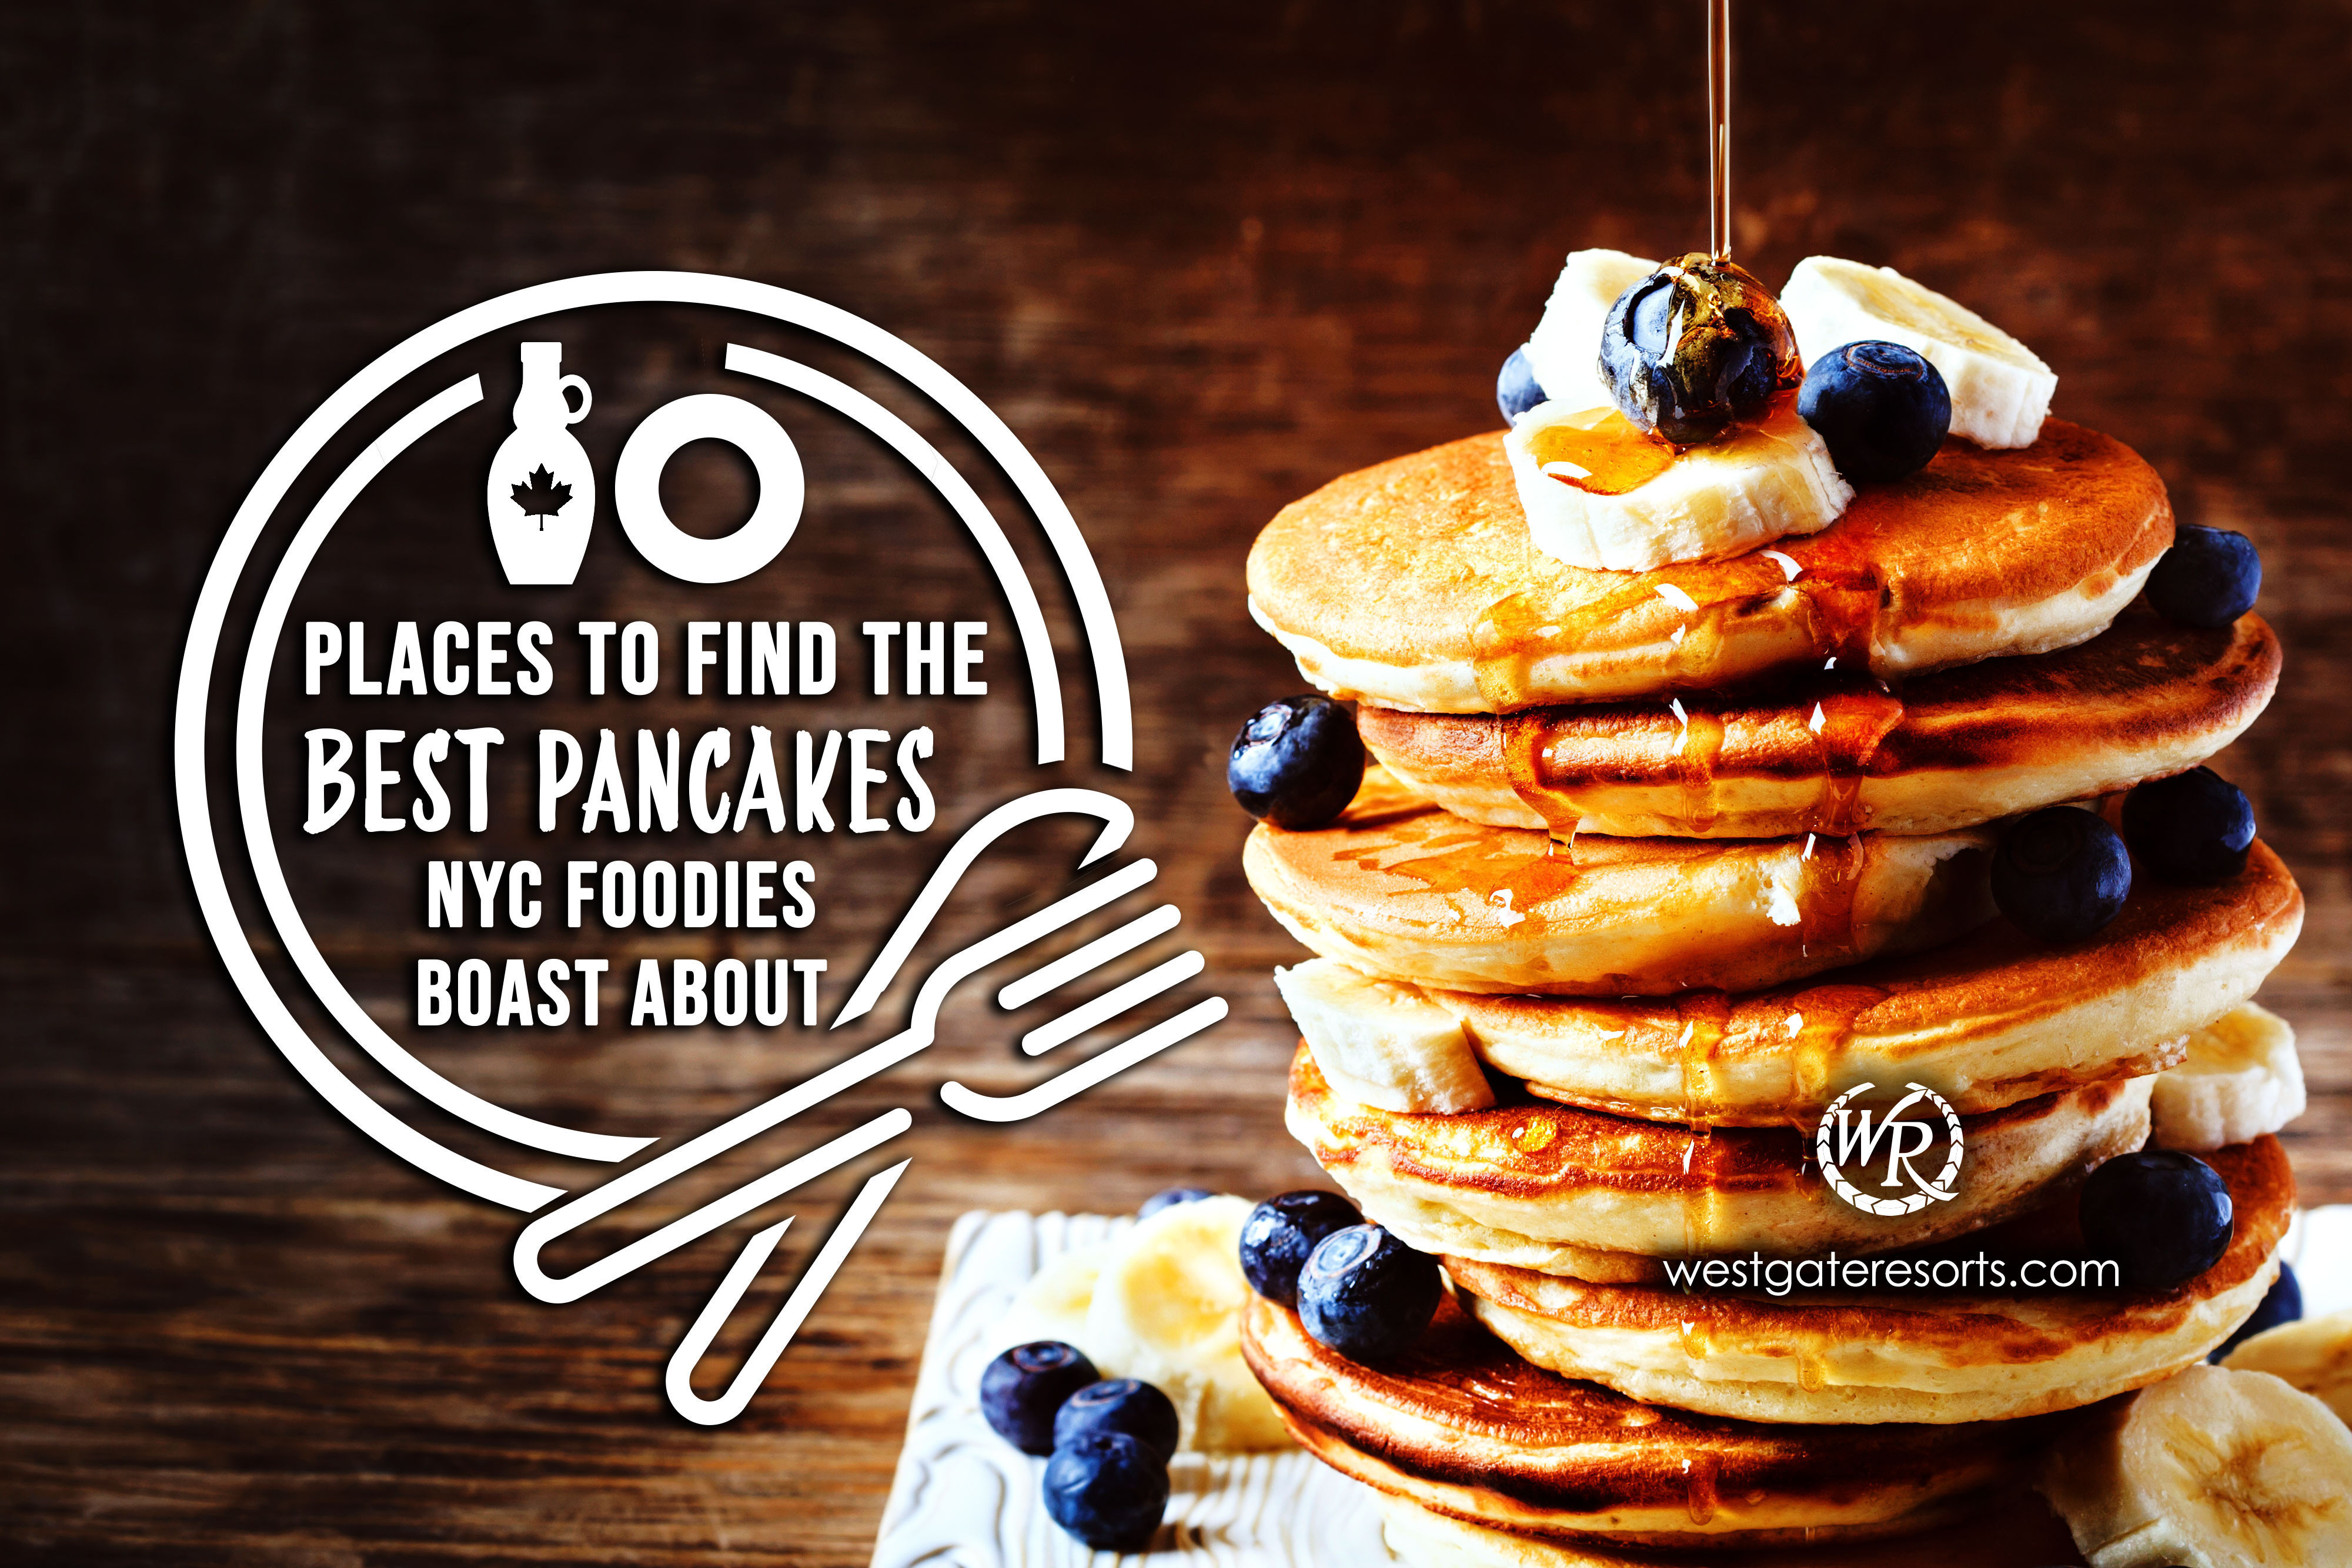 10 Places to Find the Best Pancakes NYC Foodies Boast About